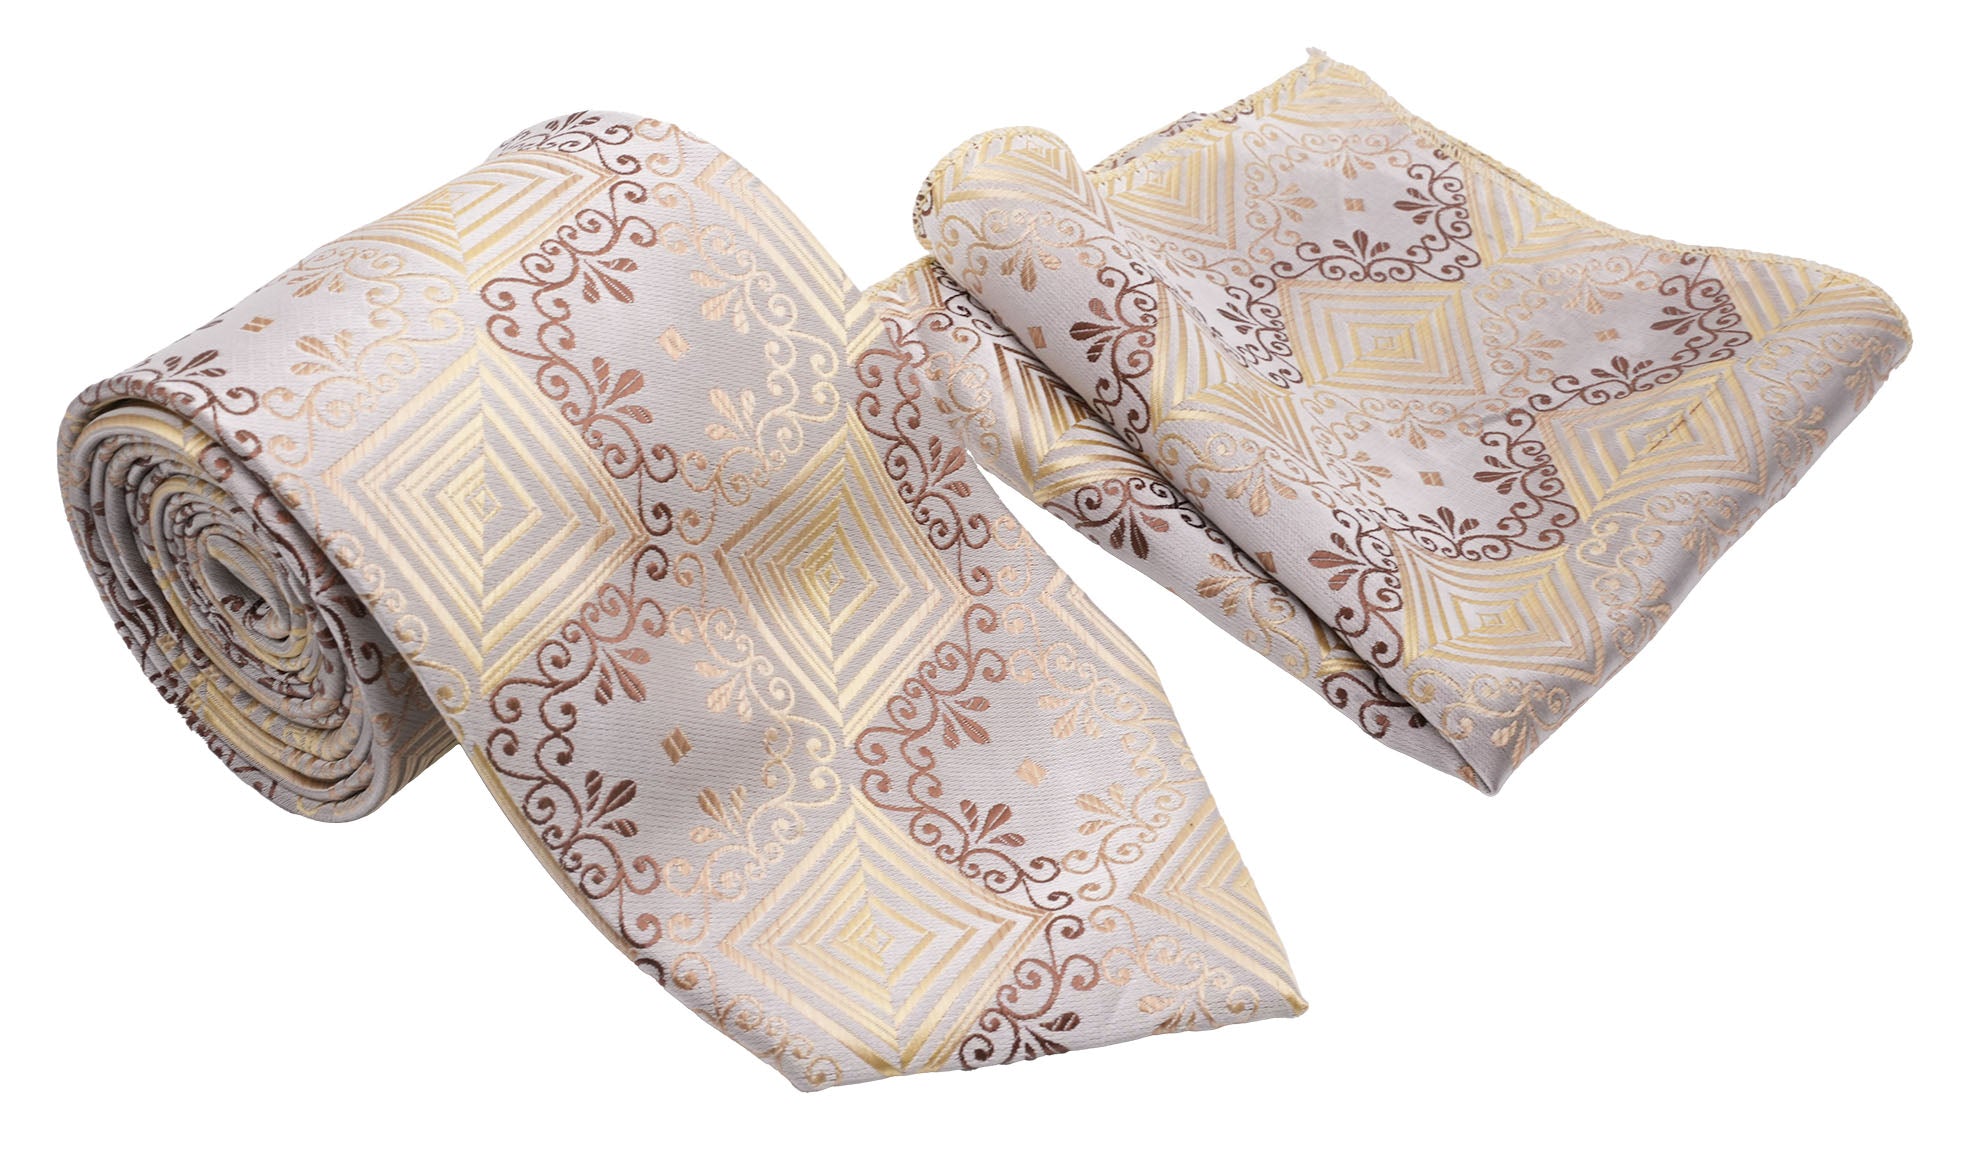 Beige Geometric Square and Scroll Pattern Men's Classic Tie and Pocket Square Set